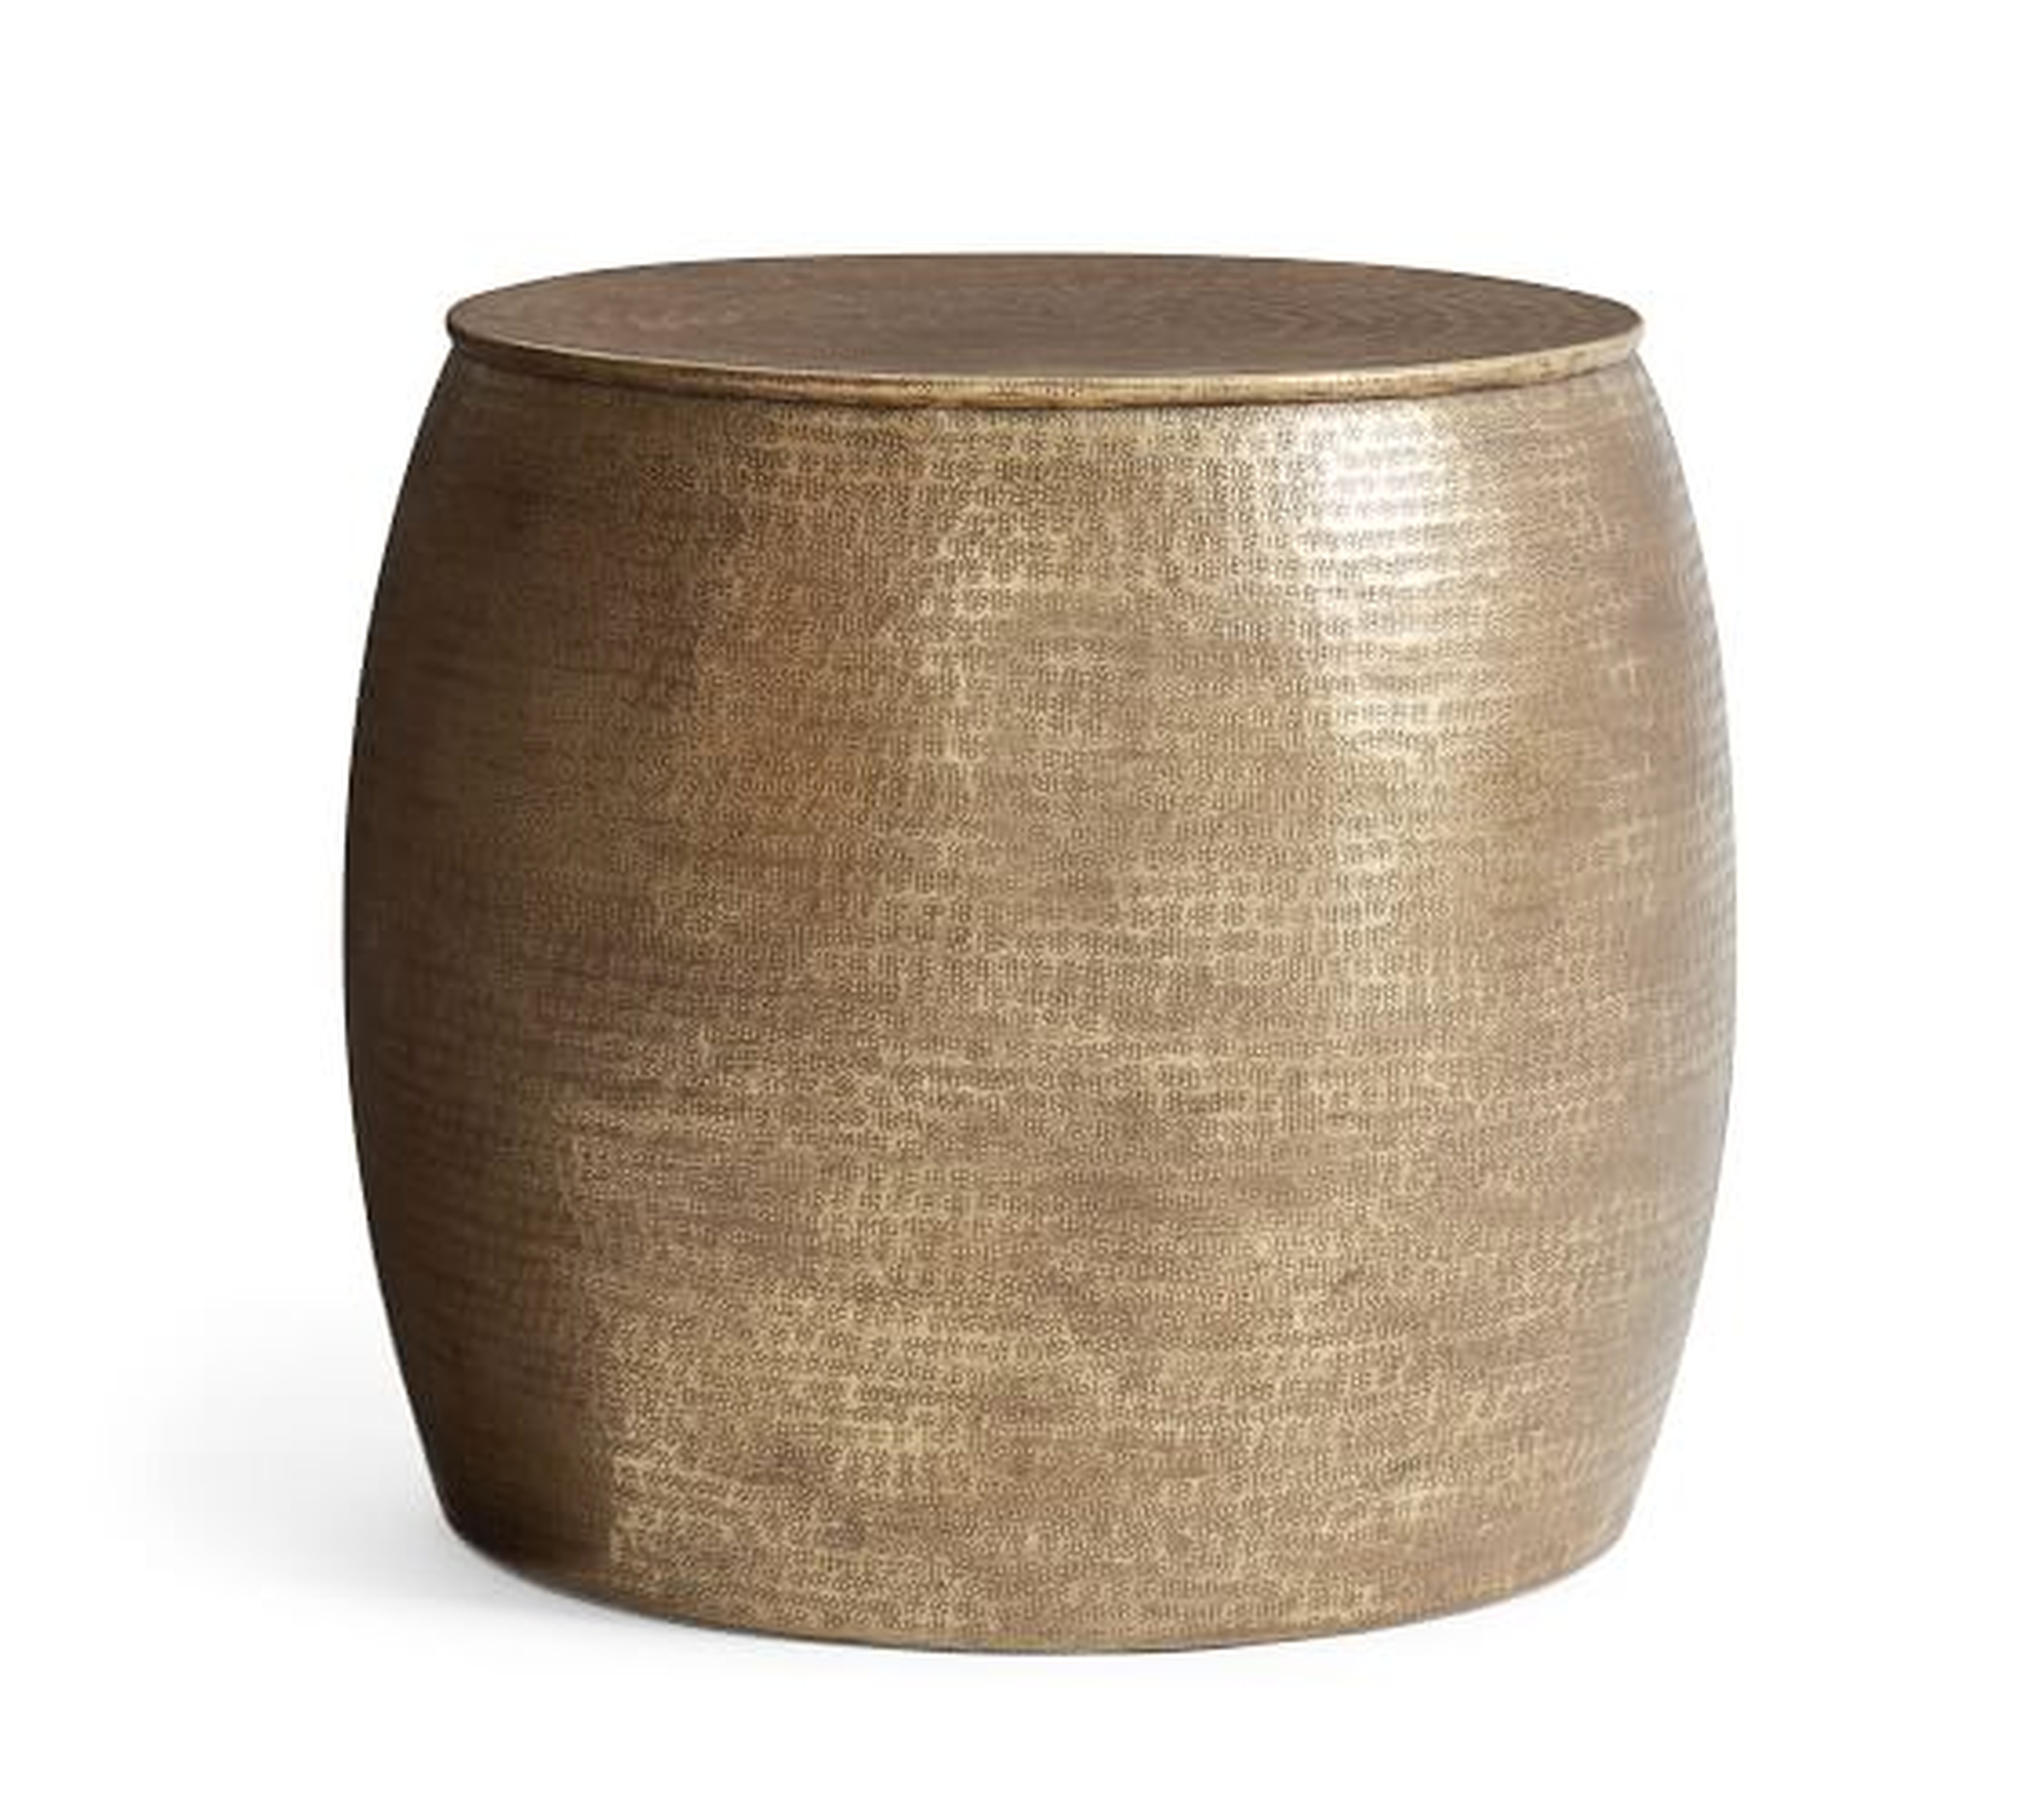 BERMUDA HAMMERED BRASS SIDE TABLE - Pottery Barn